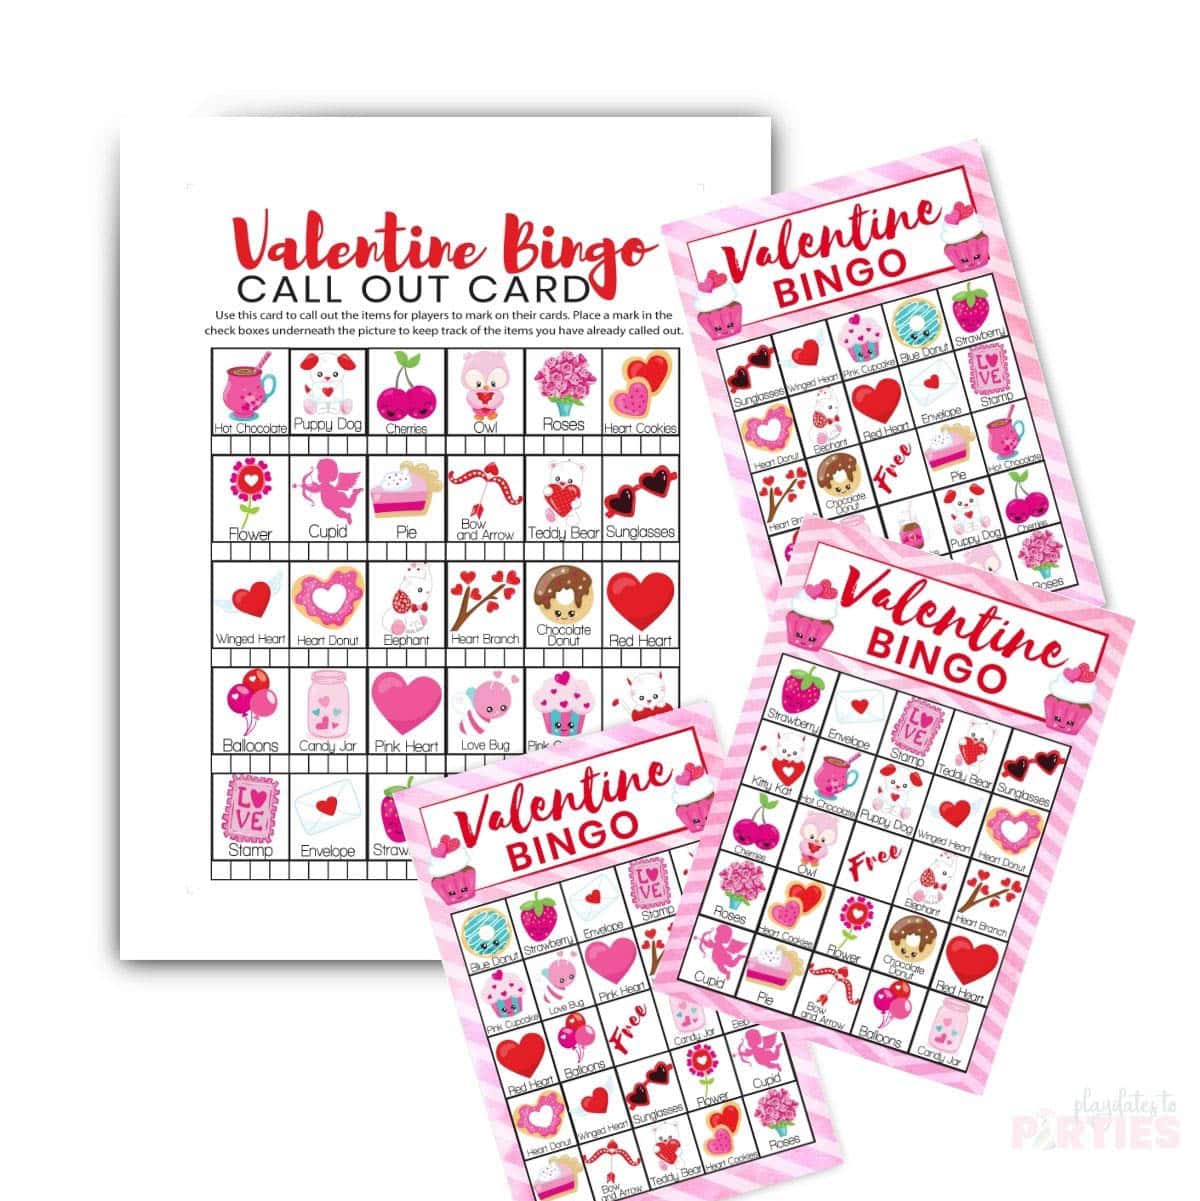 Mockup of Valentine Bingo cards and call out page.